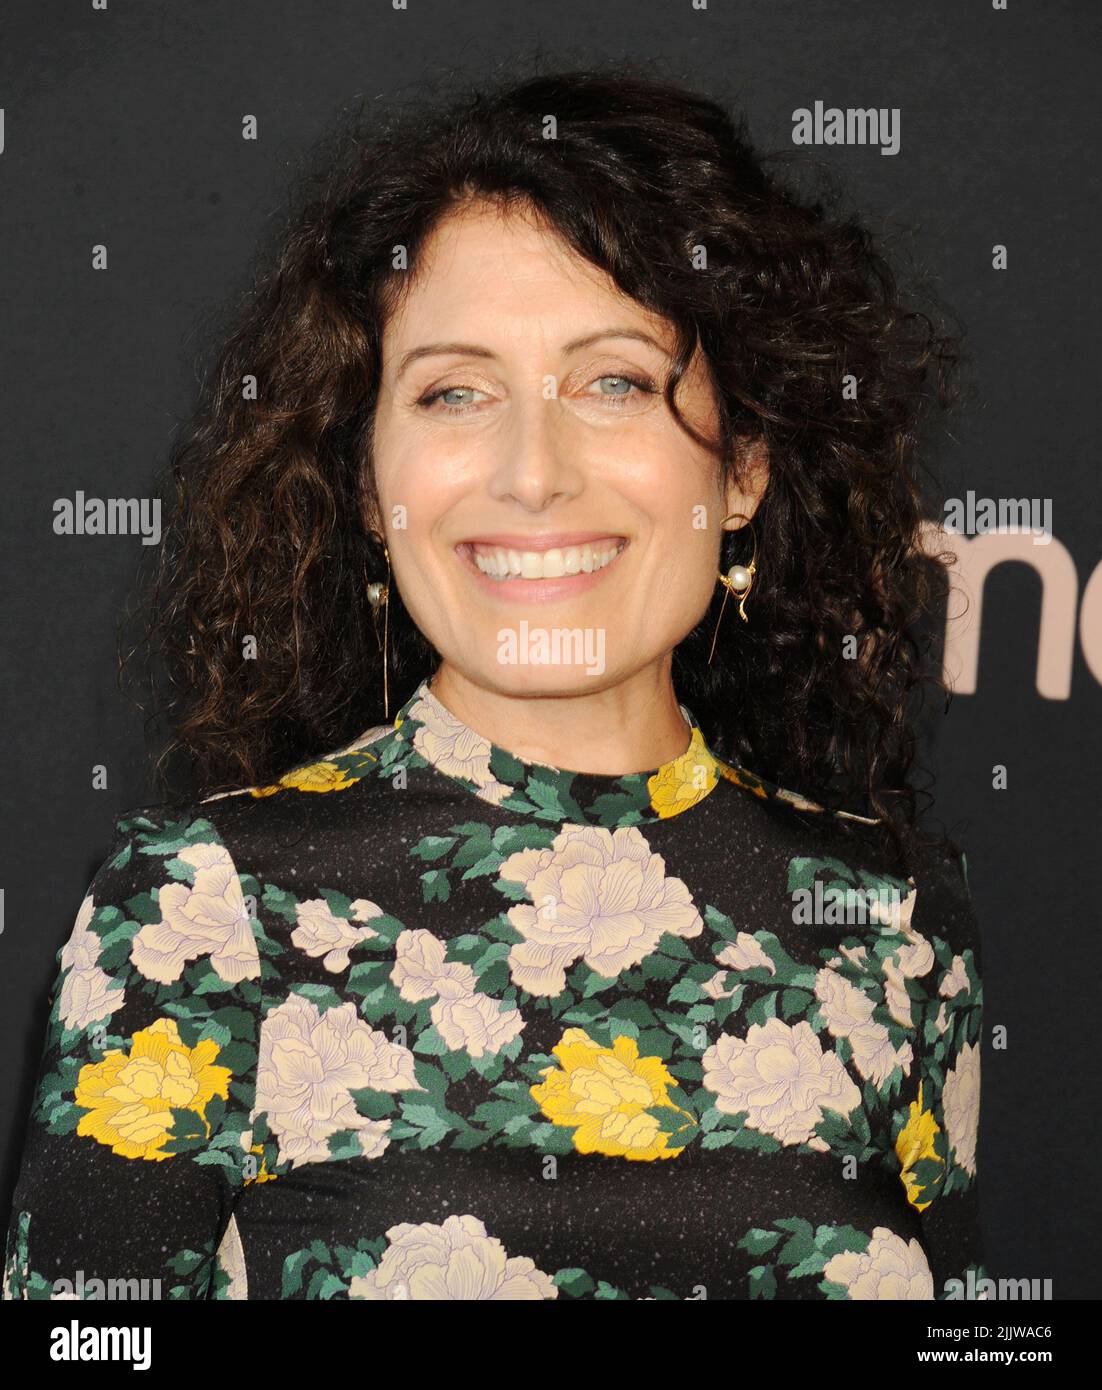 Los Angeles, Ca. 27th July, 2022. Lisa Edelstein attends the HBO Original Drama Series 'House of the Dragon' World Premiere at Academy Museum of Motion Pictures on July 27, 2022 in Los Angeles, California. Credit: Jeffrey Mayer/Jtm Photos/Media Punch/Alamy Live News Stock Photo